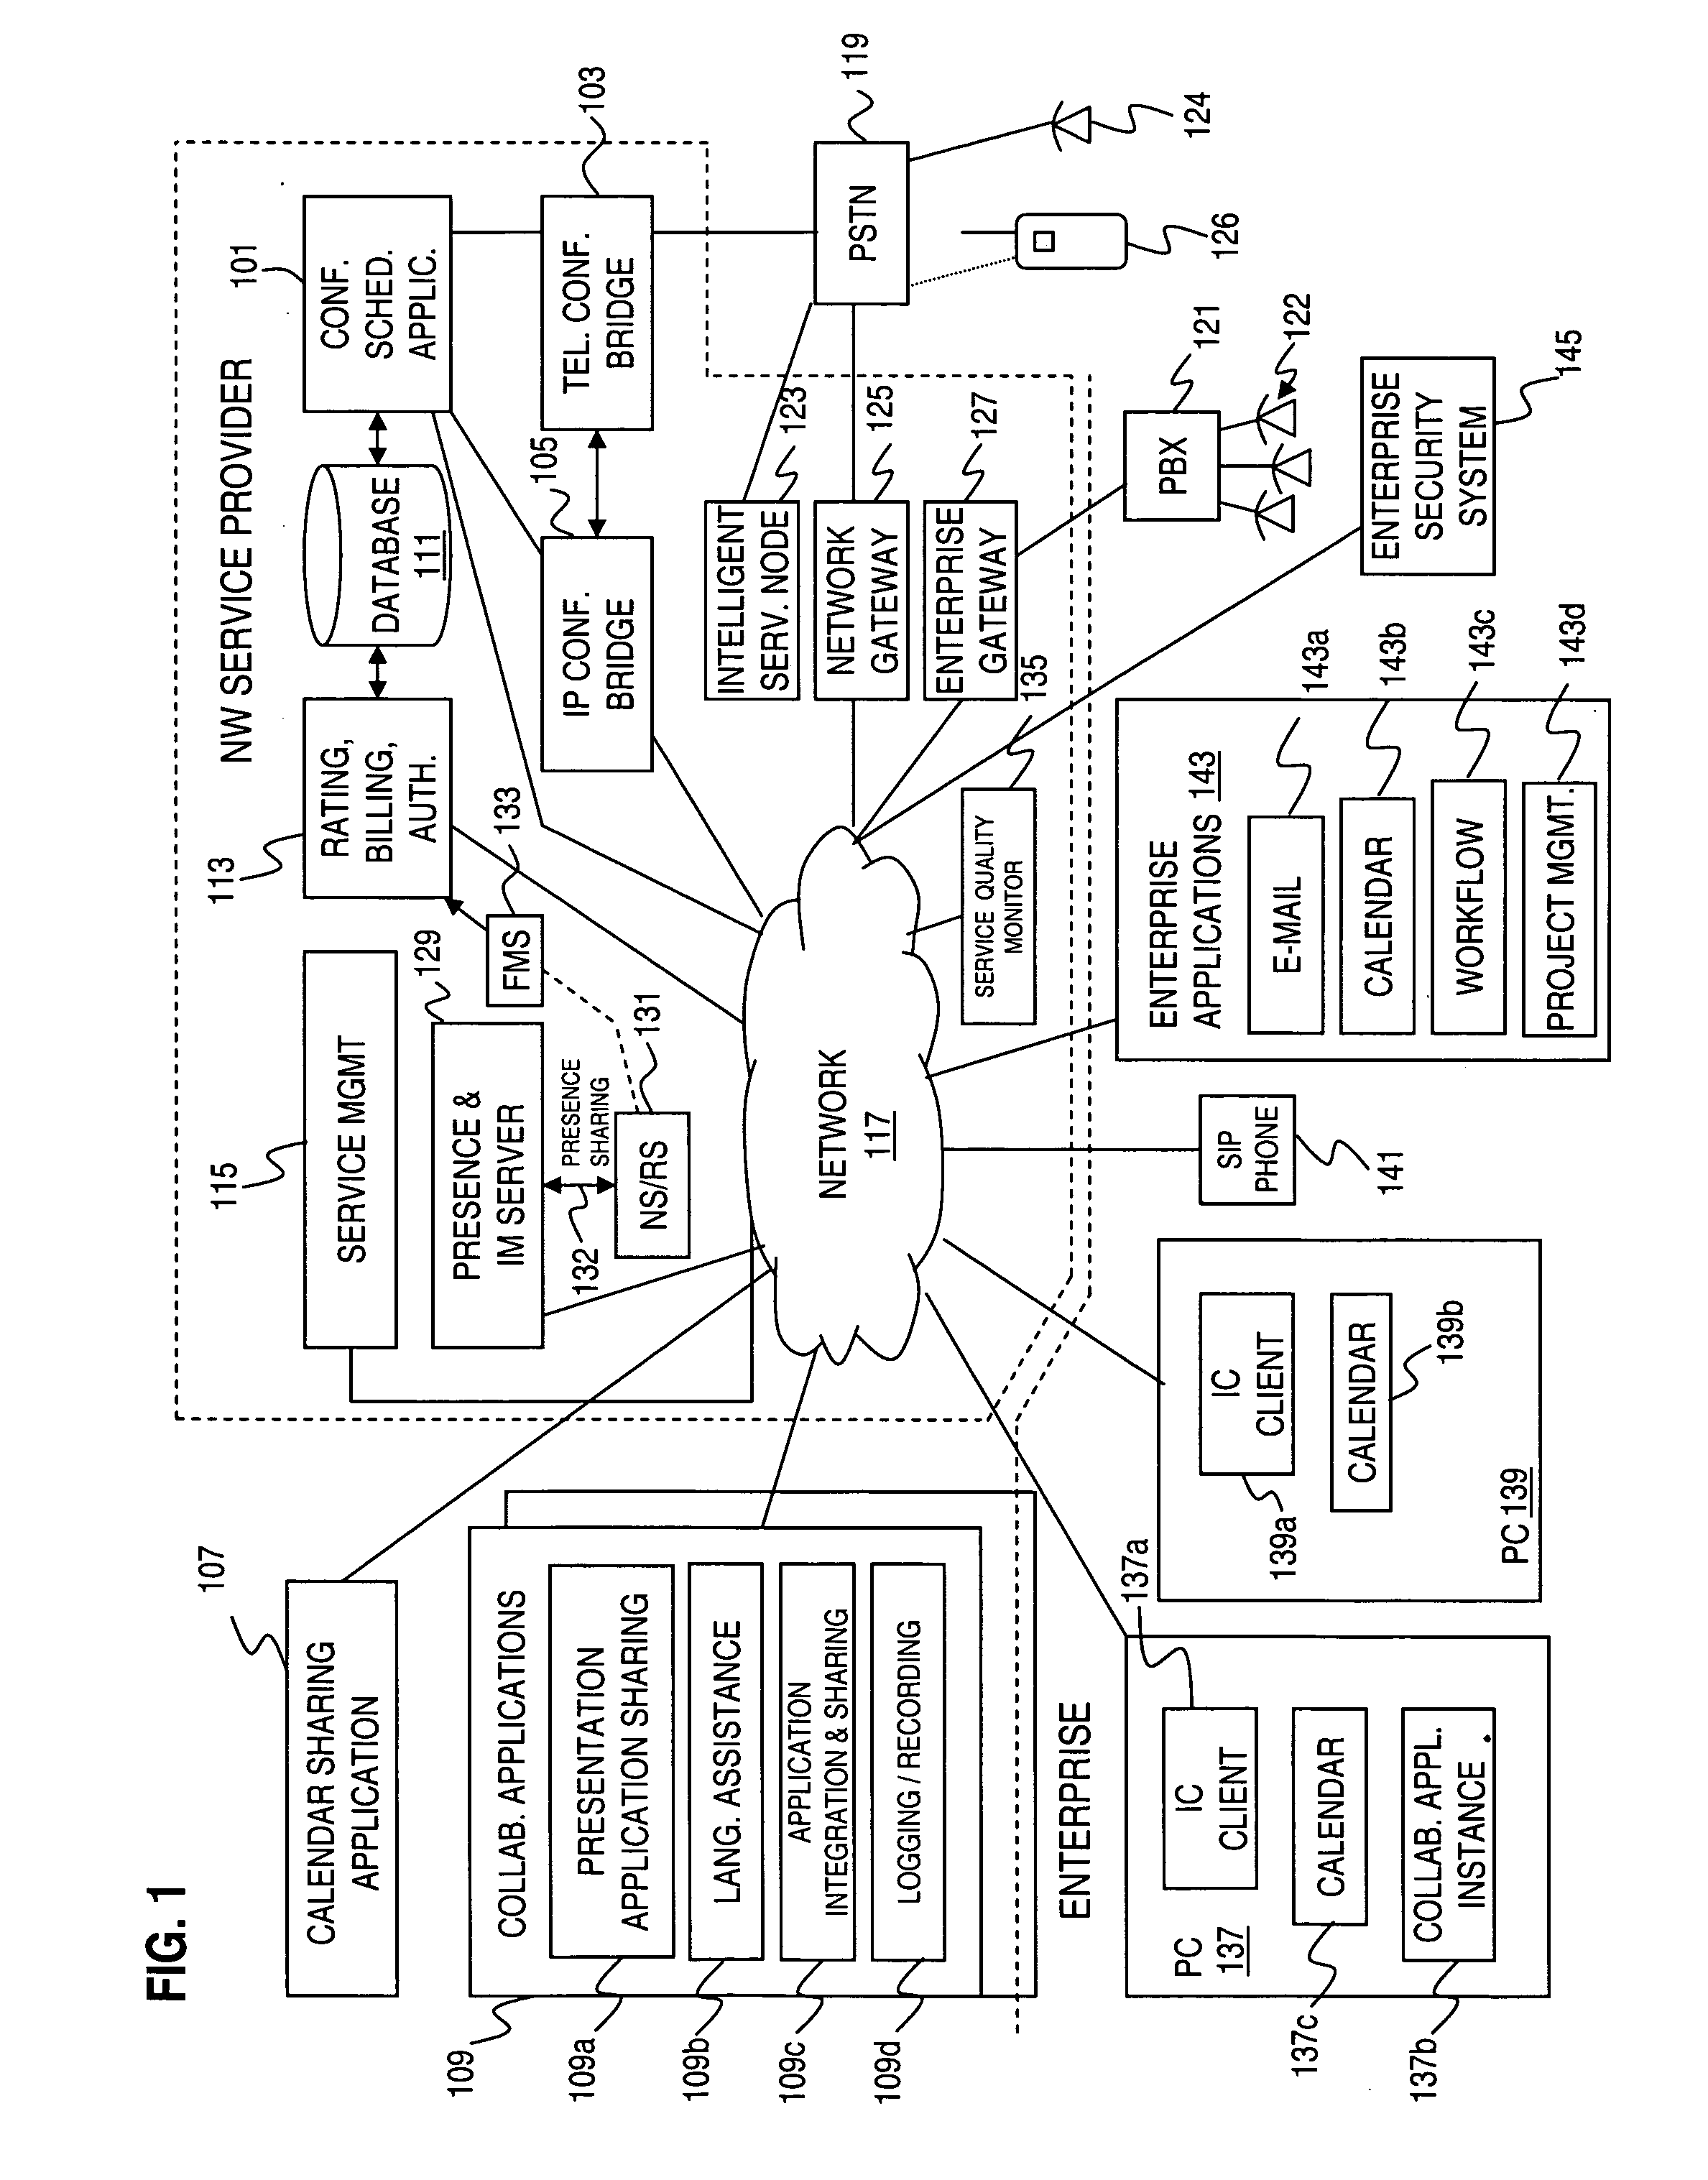 Method and system for providing conferencing services